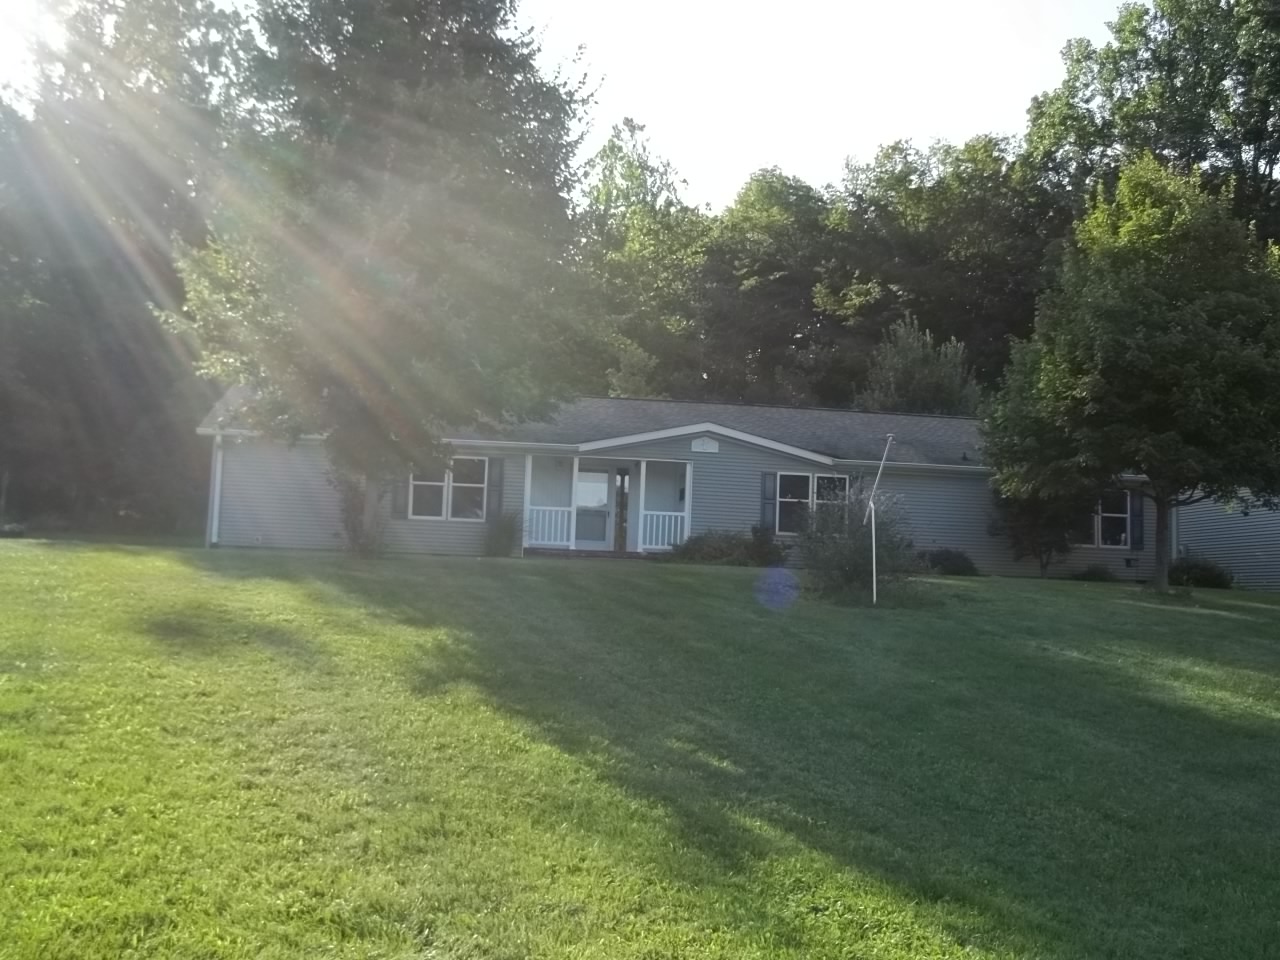  2234 N. Nyesville Rd, Rockville, IN photo